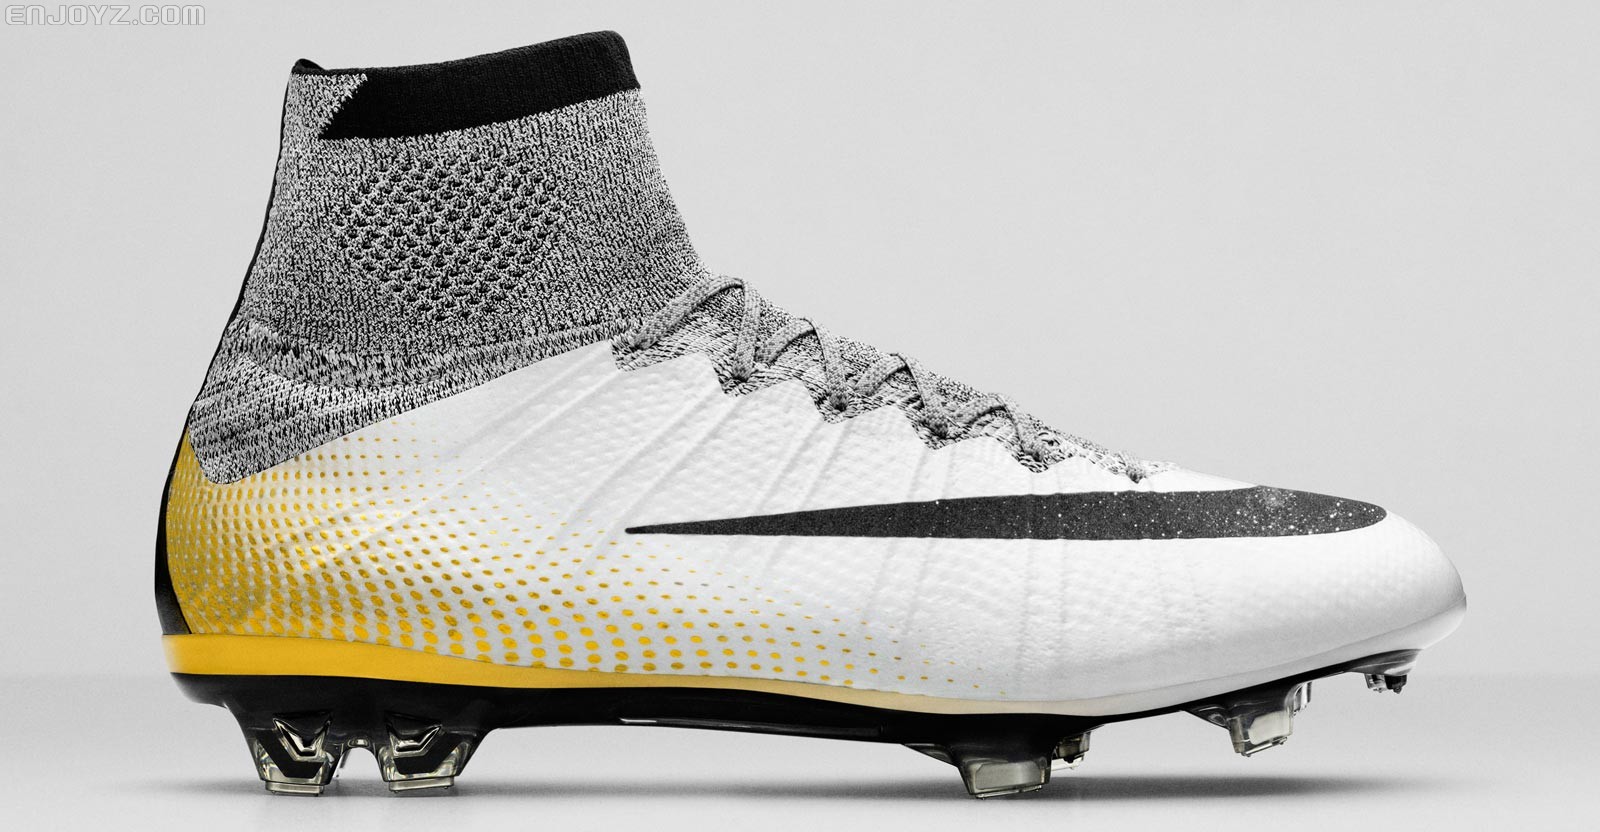 nike-mercurial-superfly-cr7-324k-gold-boots-1.jpg